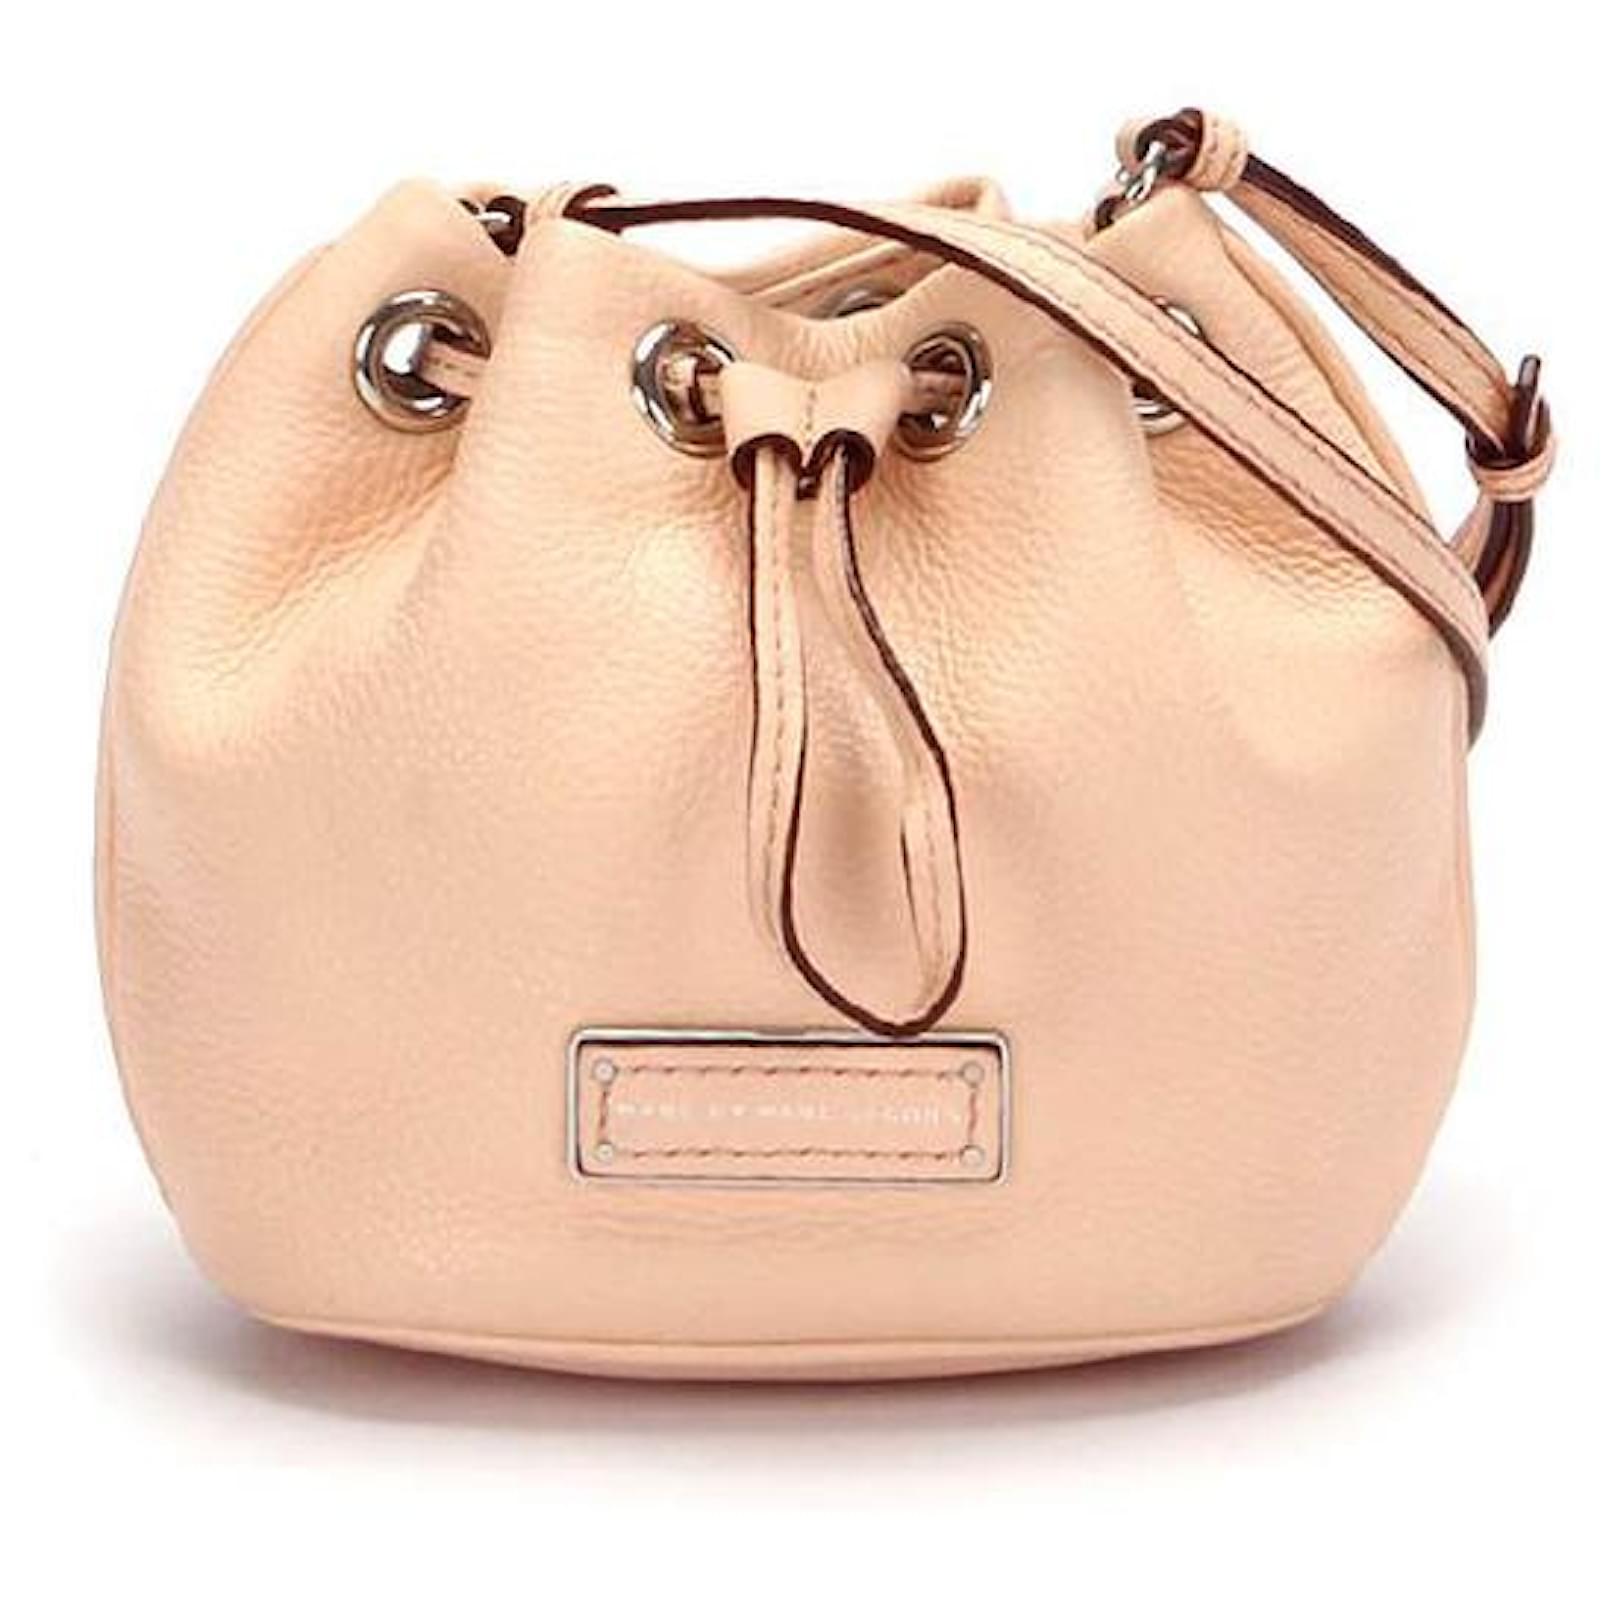 Marc Jacobs Brown 'The Bucket' Bag